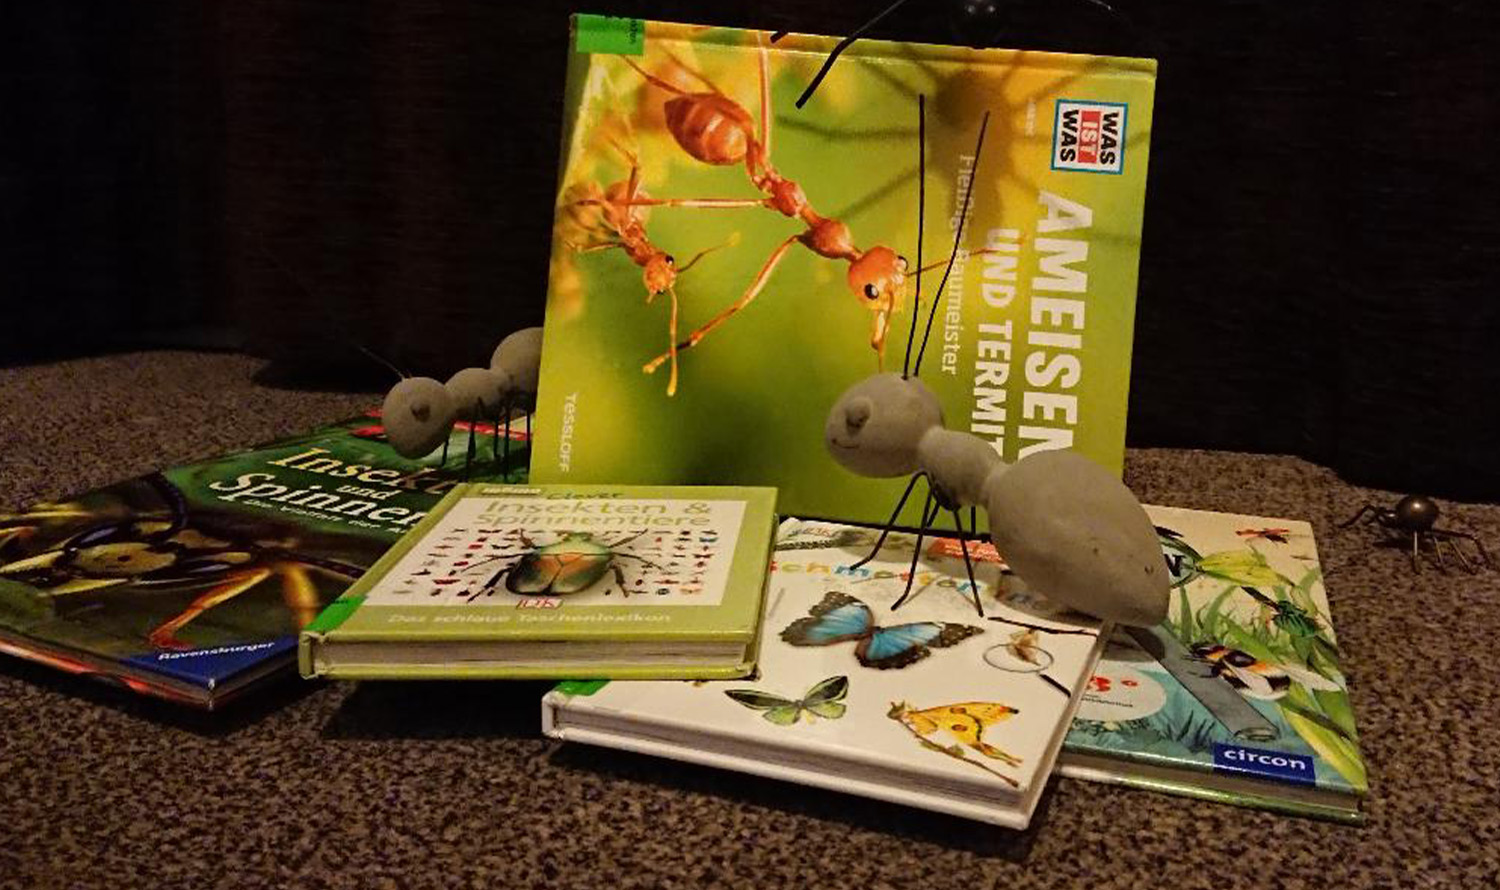 Insect books and ant figures.